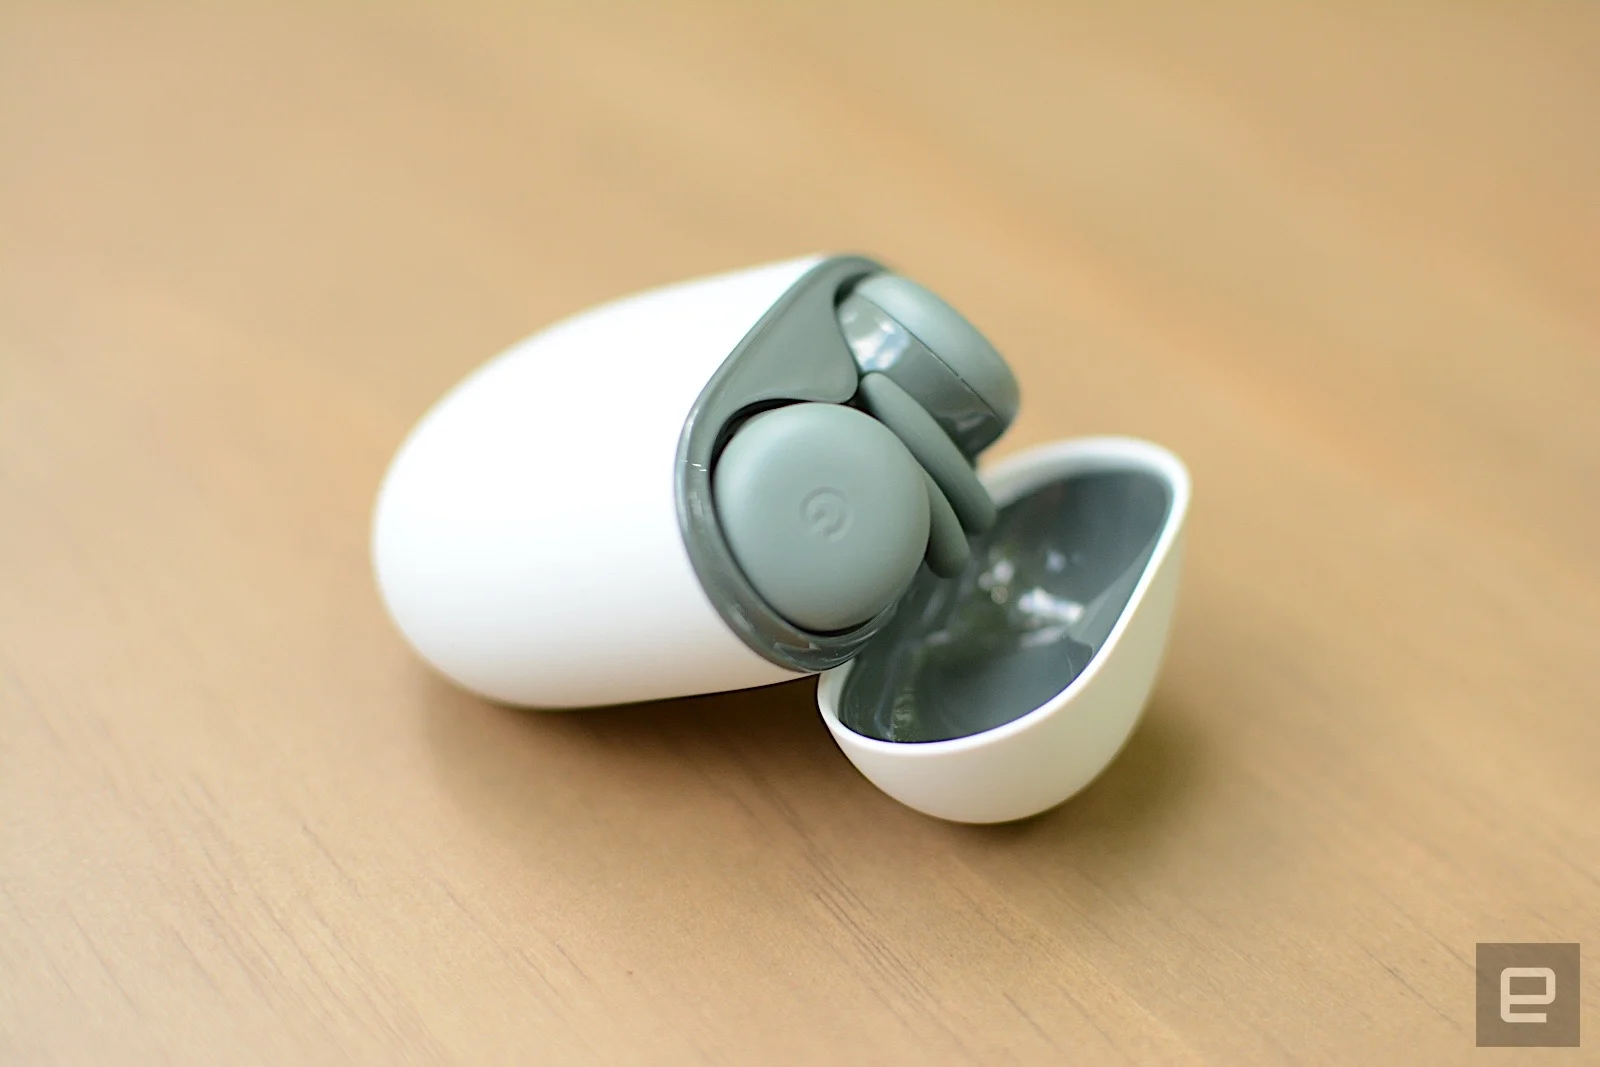 Google’s latest true wireless earbuds are a $99 version of the Pixel Buds it debuted in 2020. Surprisingly, the company kept nearly all of the features that made those buds such a good option for users who prefer Google Assistant. The company did nix the on-board volume controls and Adaptive Sound is still no replacement for ANC, but there’s a lot to like here for the price. 